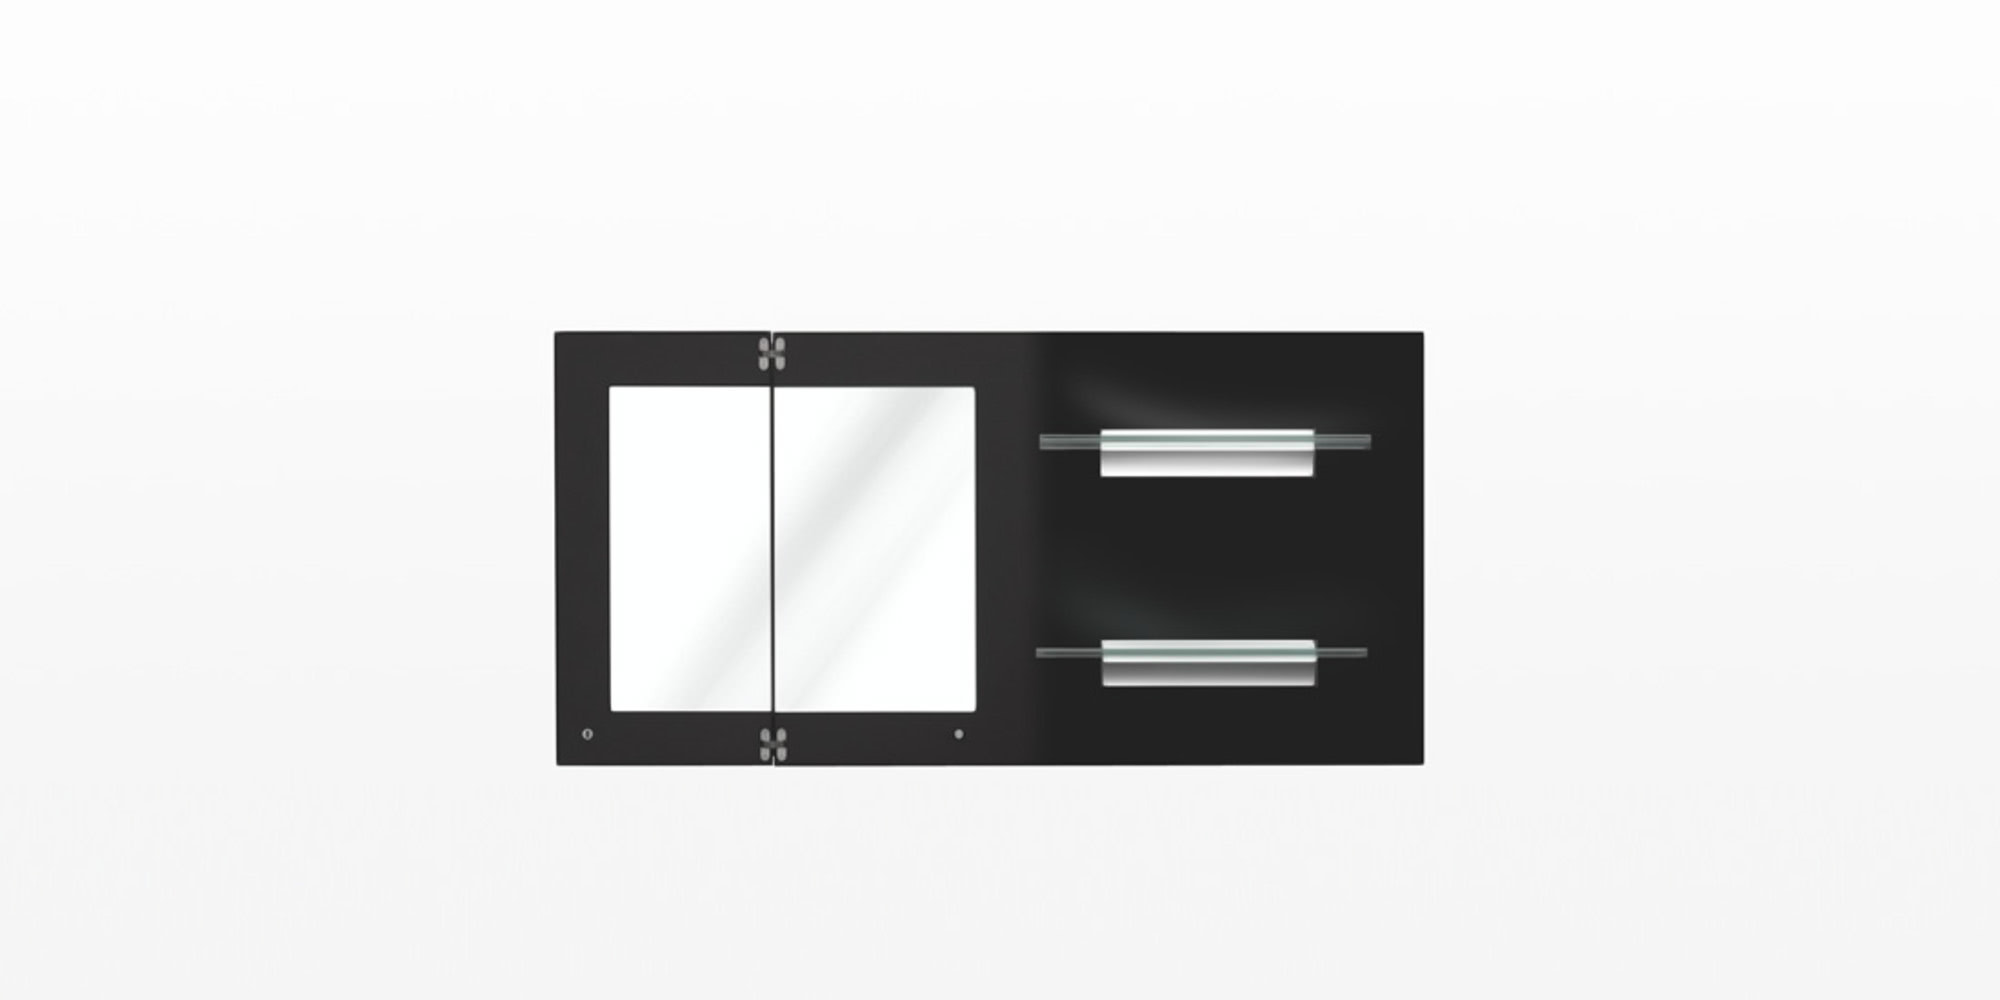 Design Initial Riga folding mirror with glass shelves on display